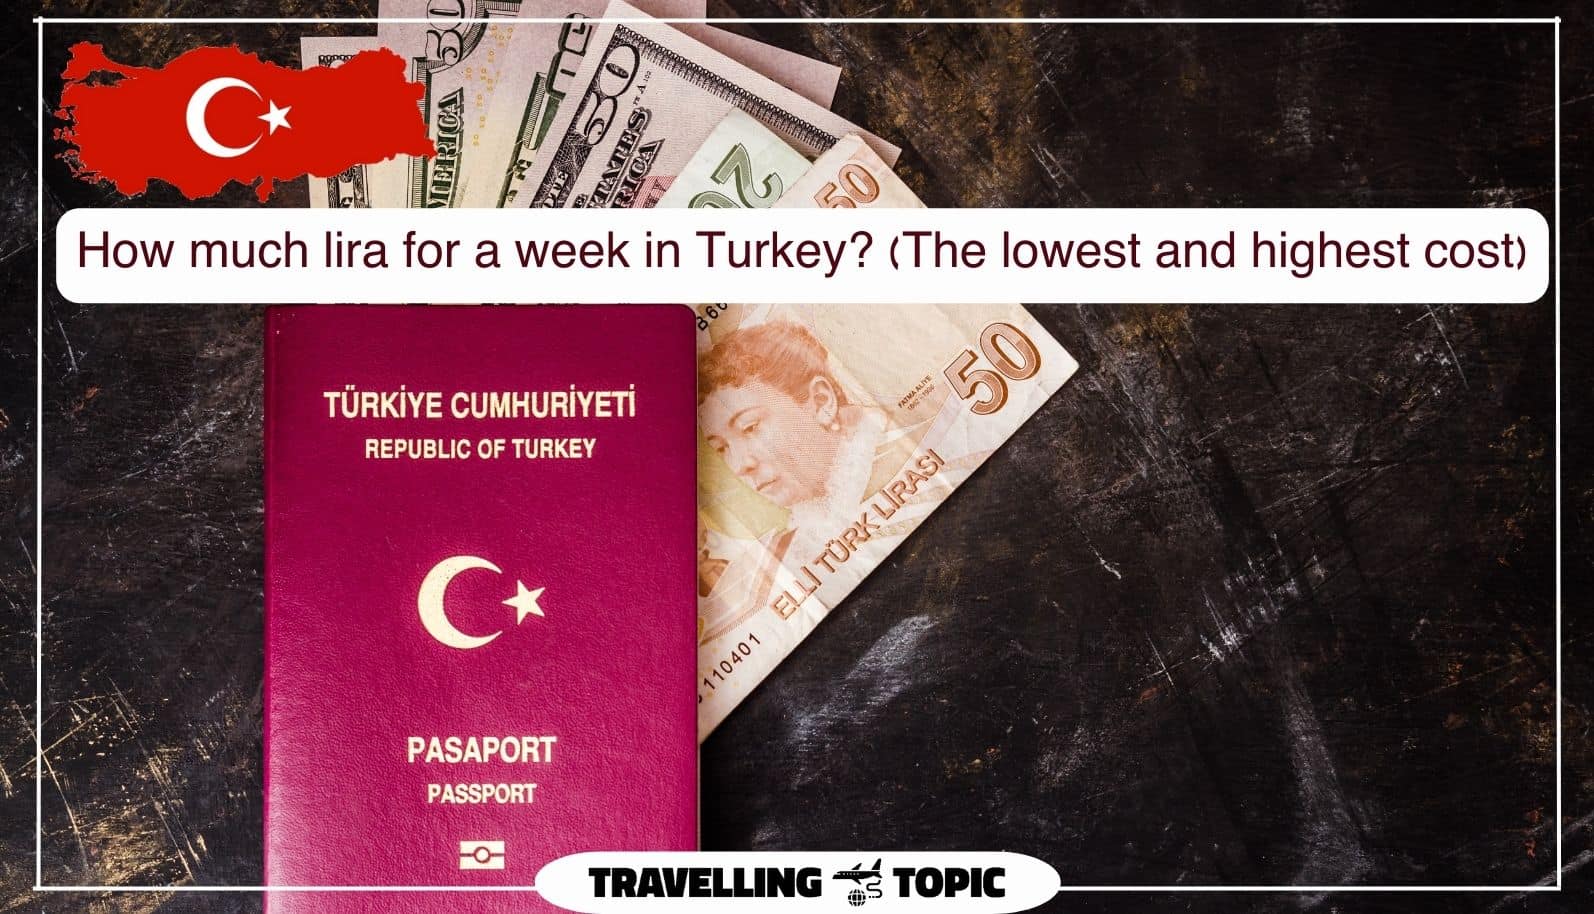 How Much Lira For A Week In Turkey? Travelling Topic